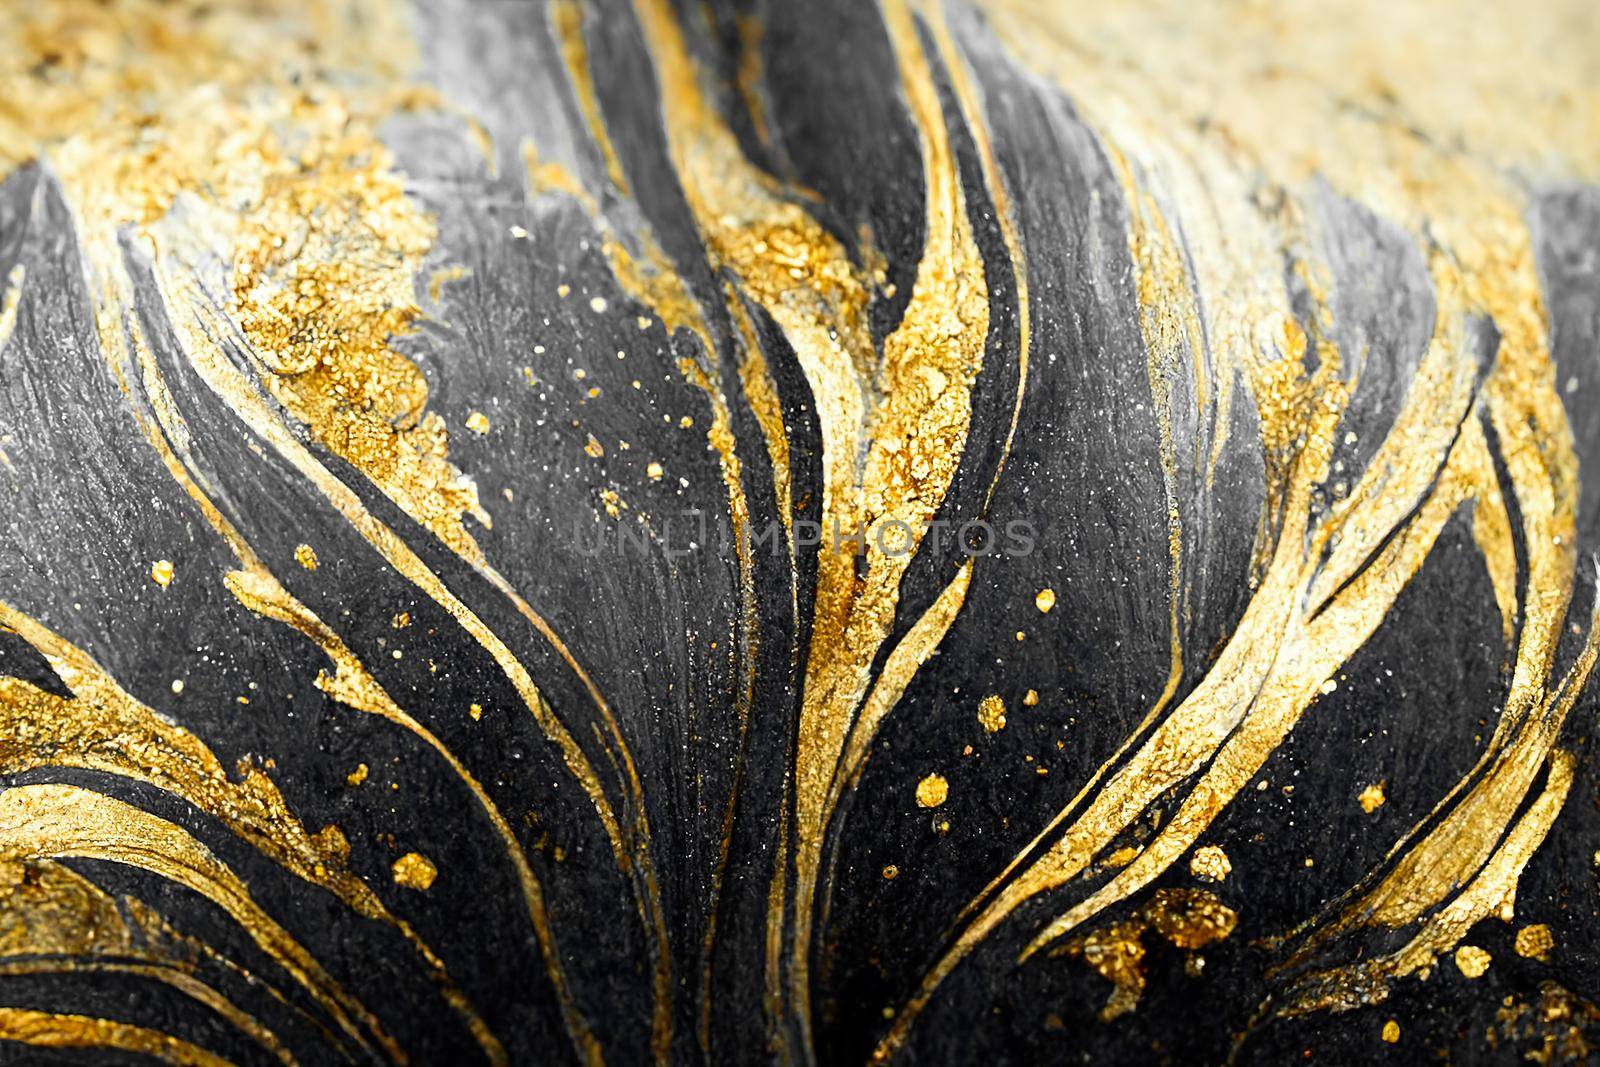 Spectacular realistic abstract backdrop of a whirlpool of black and gold. Digital art 3D illustration. Mable with liquid texture like turbulent waves background.